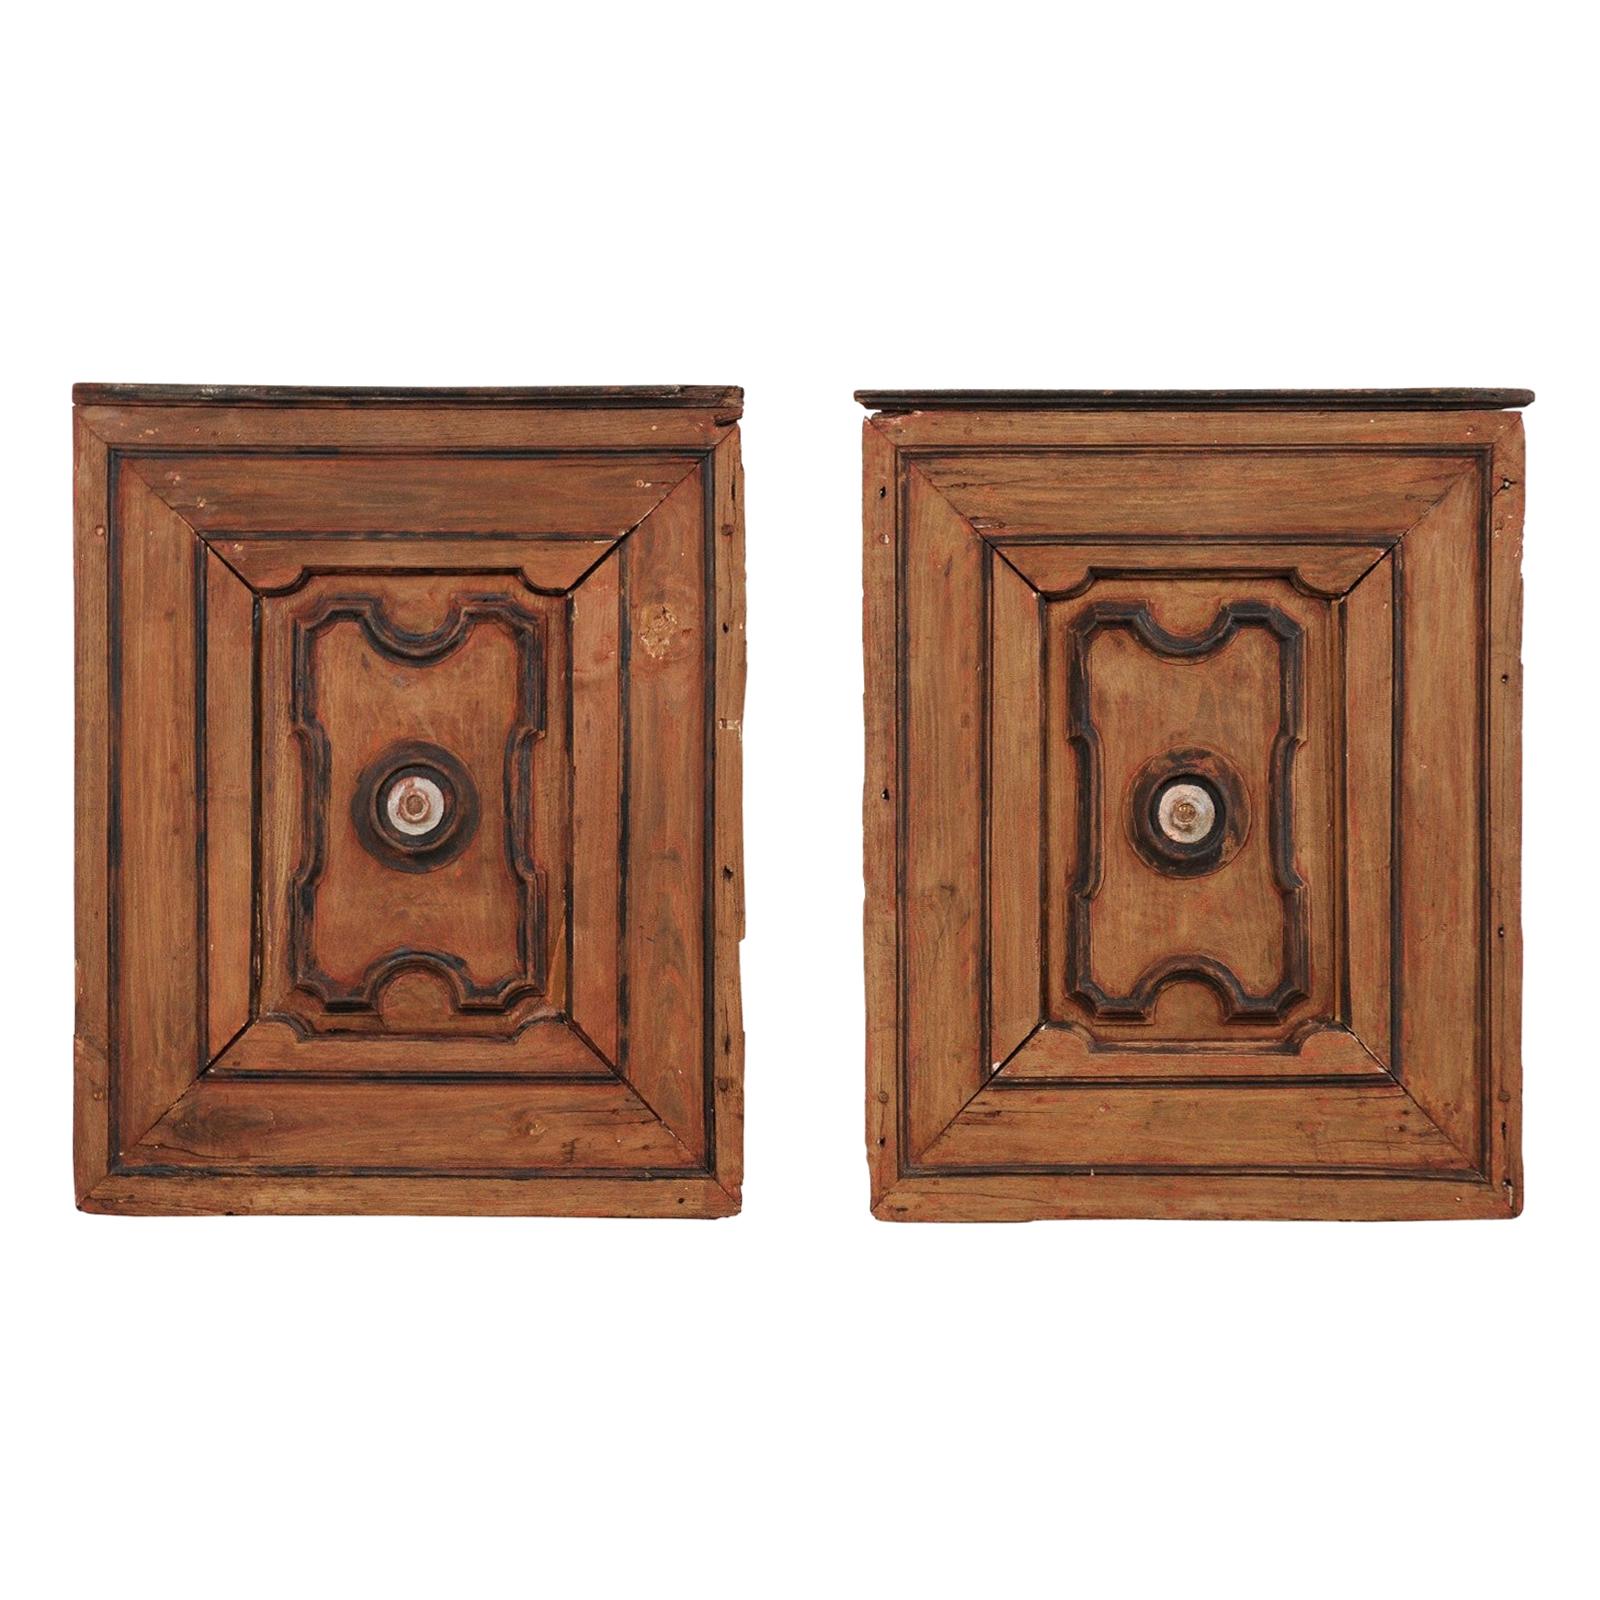 Pair of Italian Decorative Wall Panels from Turn of 18th-19th Century 